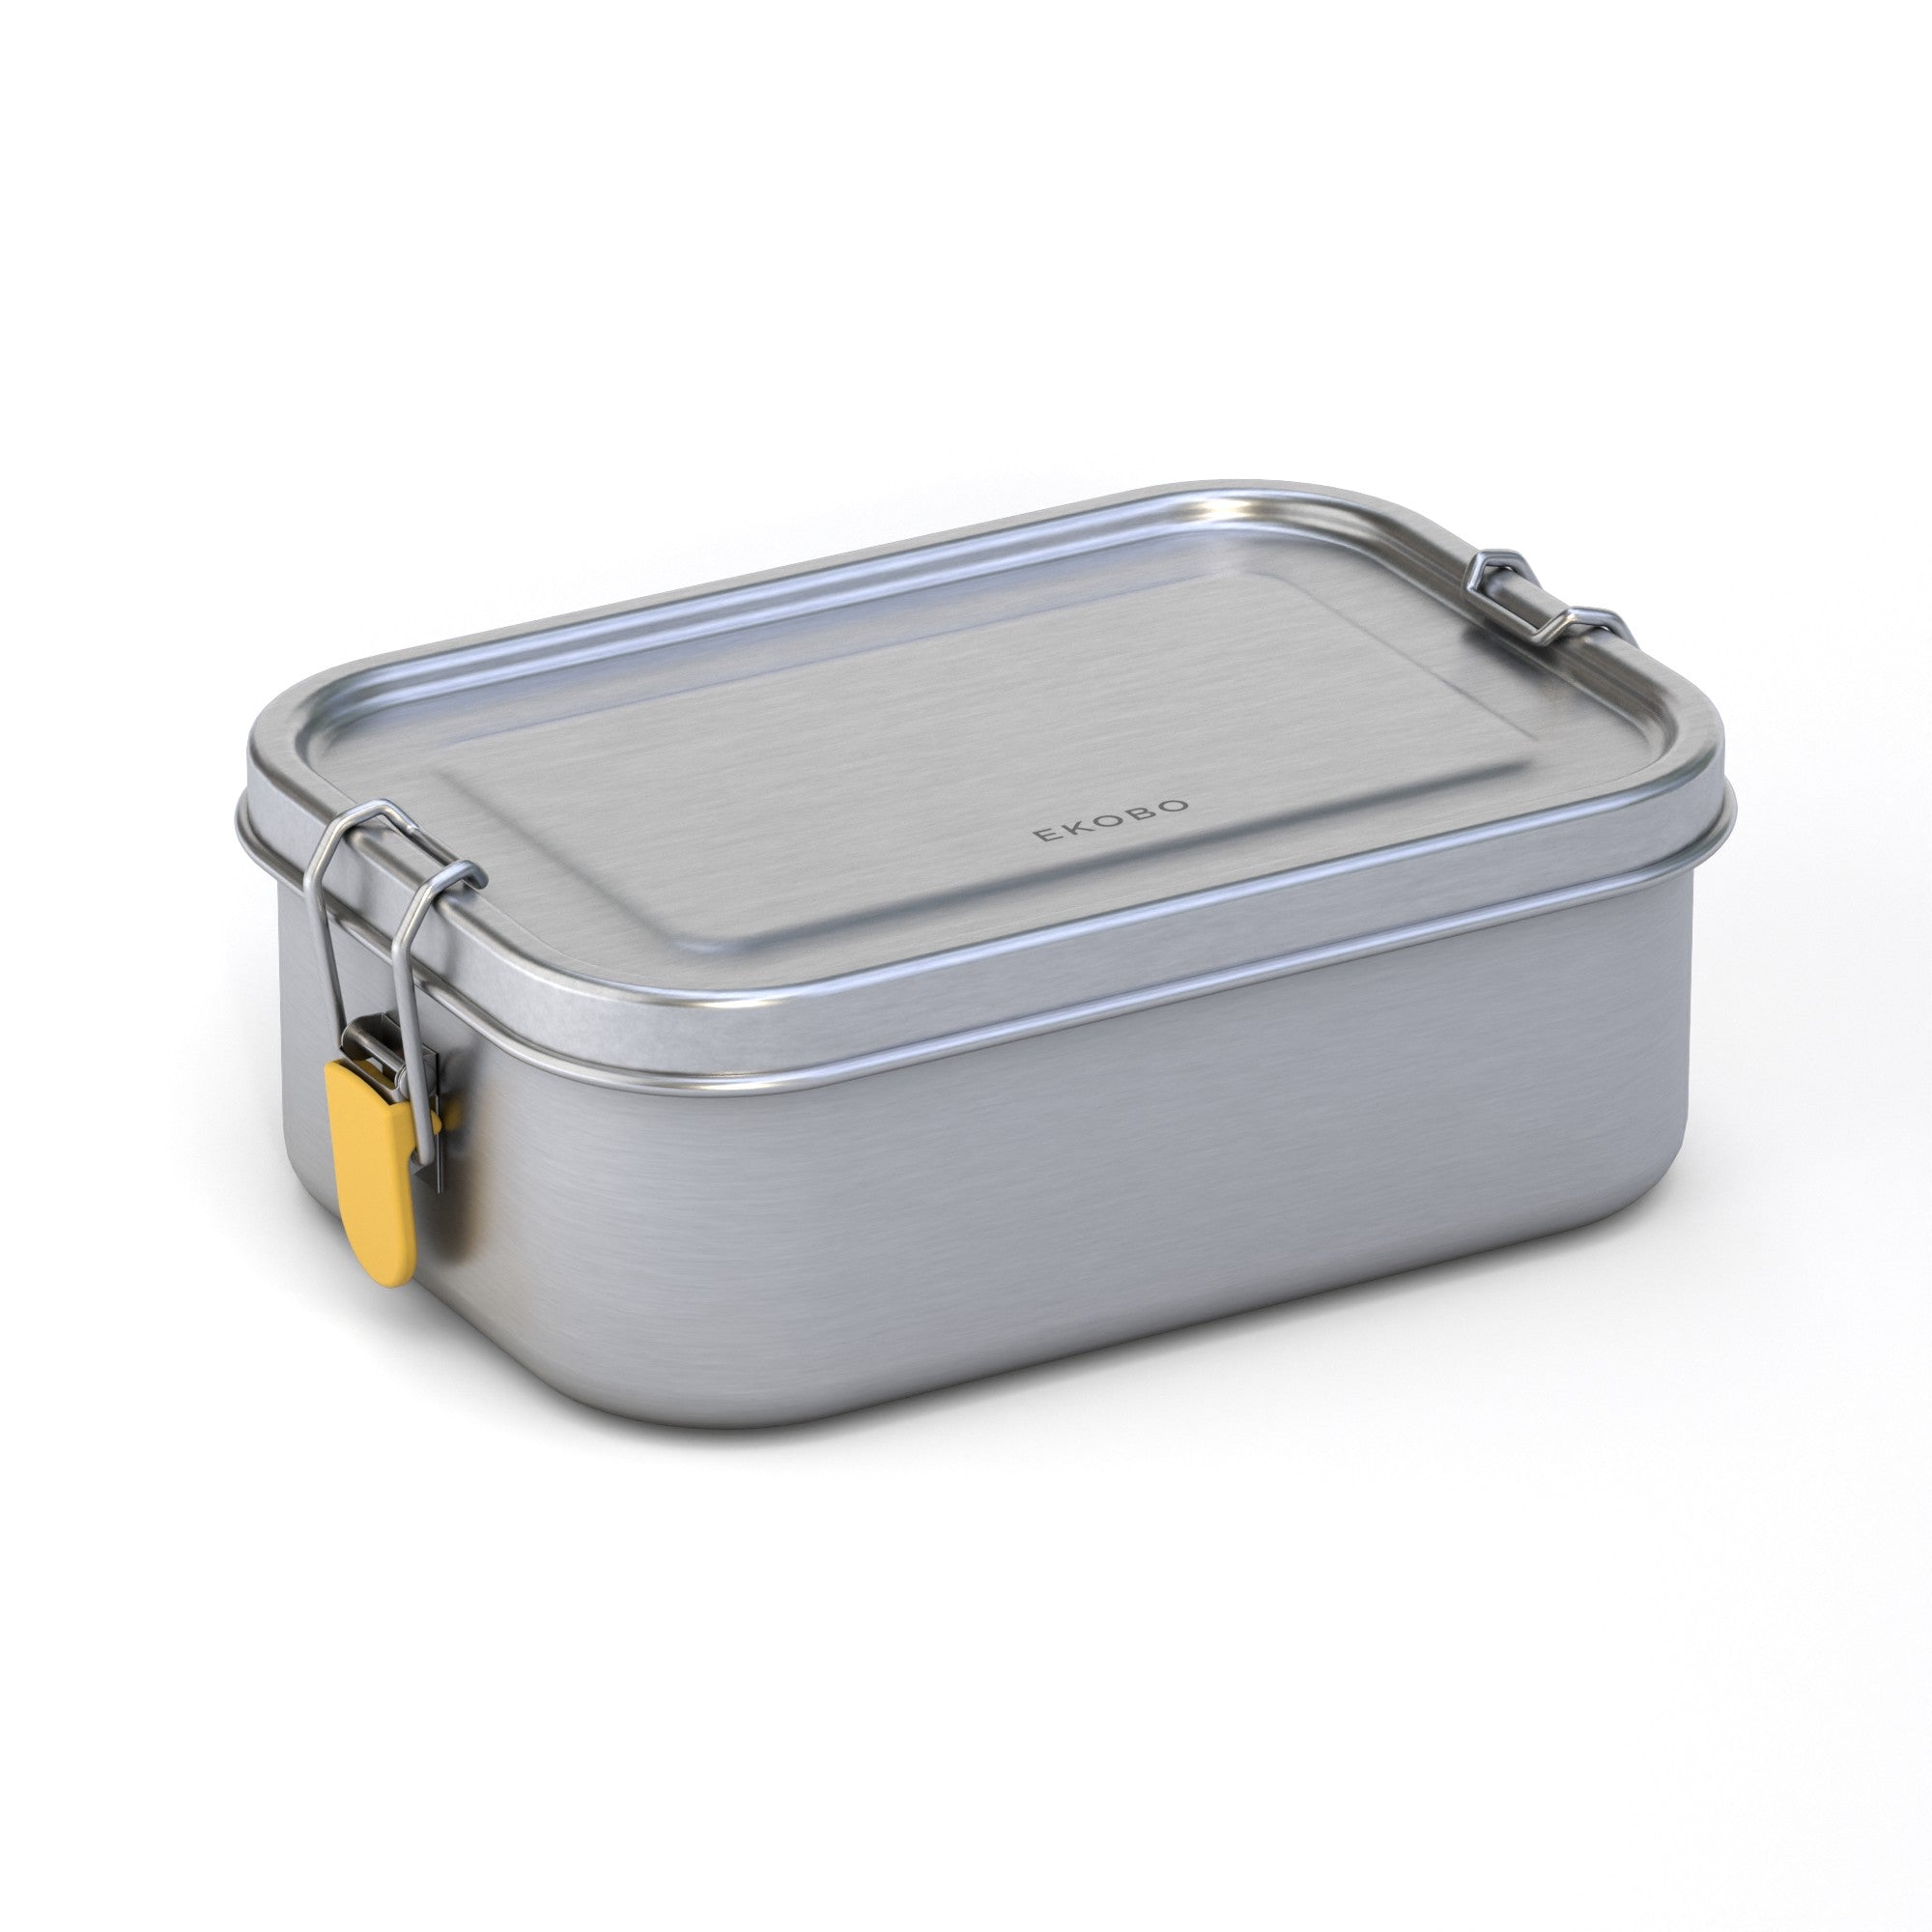 Stainless Steel Lunch Box With Heat Safe Insert - Lemon